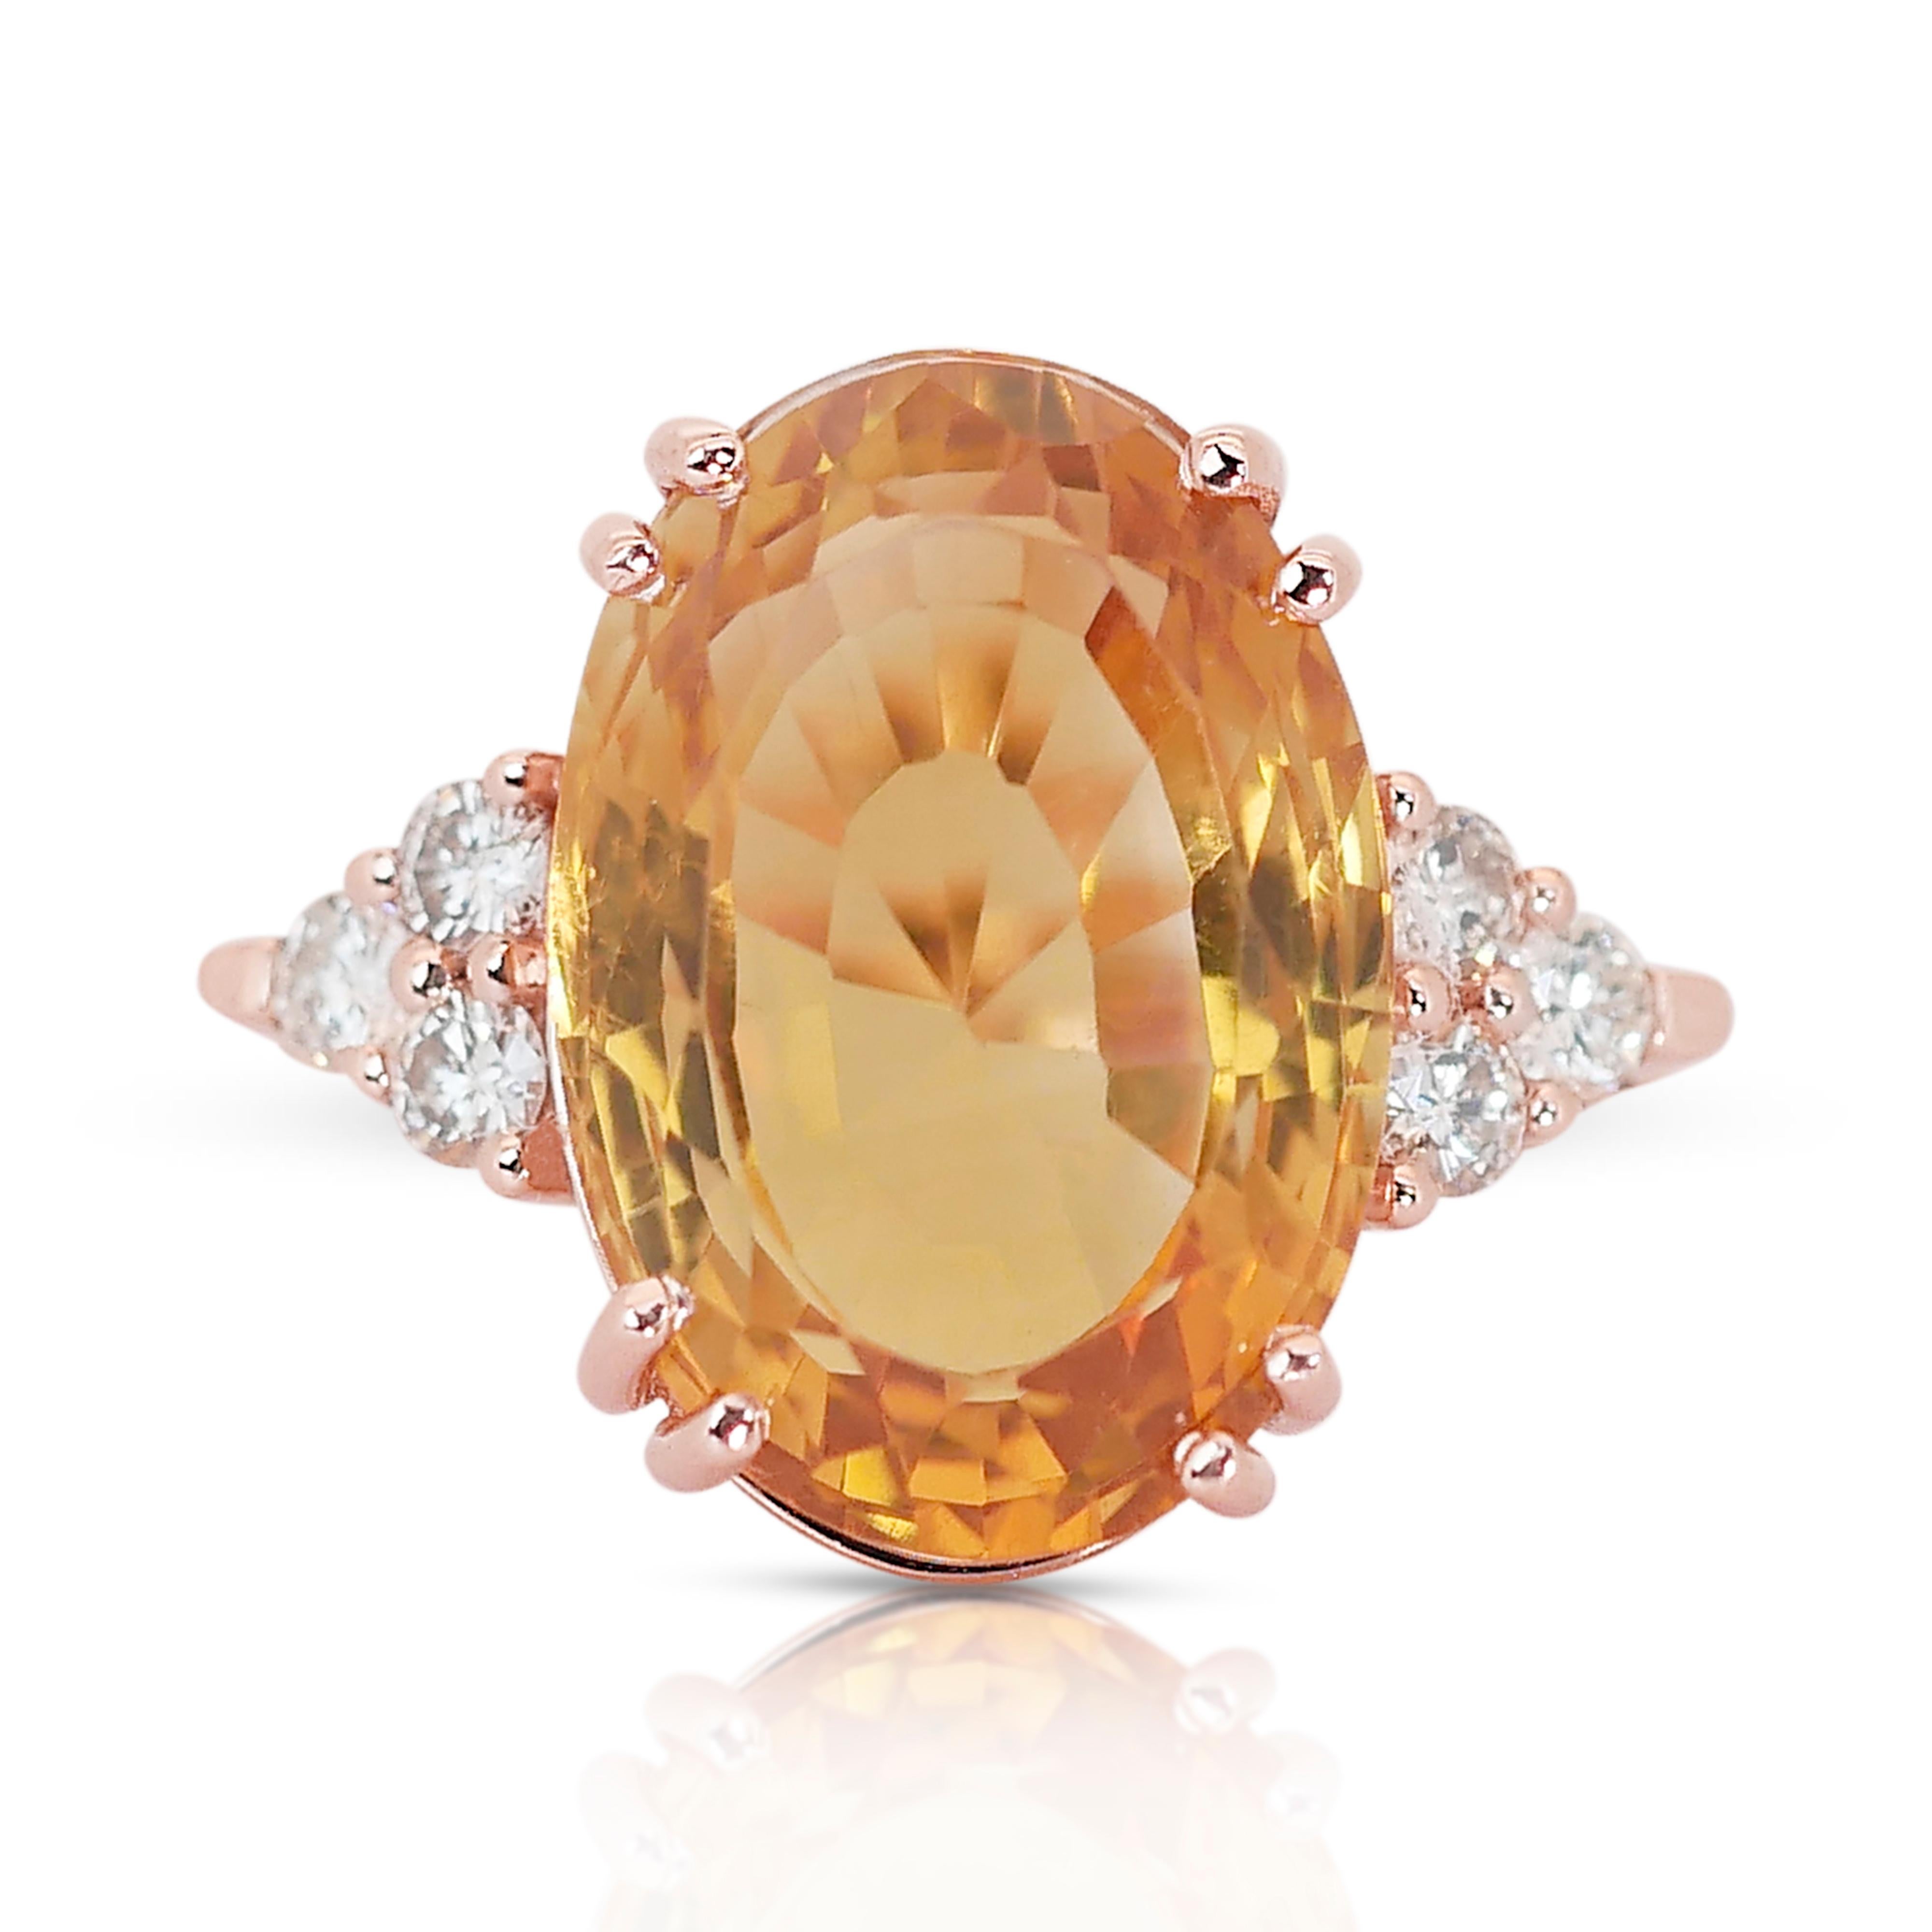 Gorgeous 14K Rose Gold Citrine and Diamond Dome Ring w/10.69 ct - IGI Certified

This fascinating dome ring is a burst of sunshine, showcasing a mesmerizing citrine gemstone meticulously set in gleaming 14k rose gold. The centerpiece of this ring is